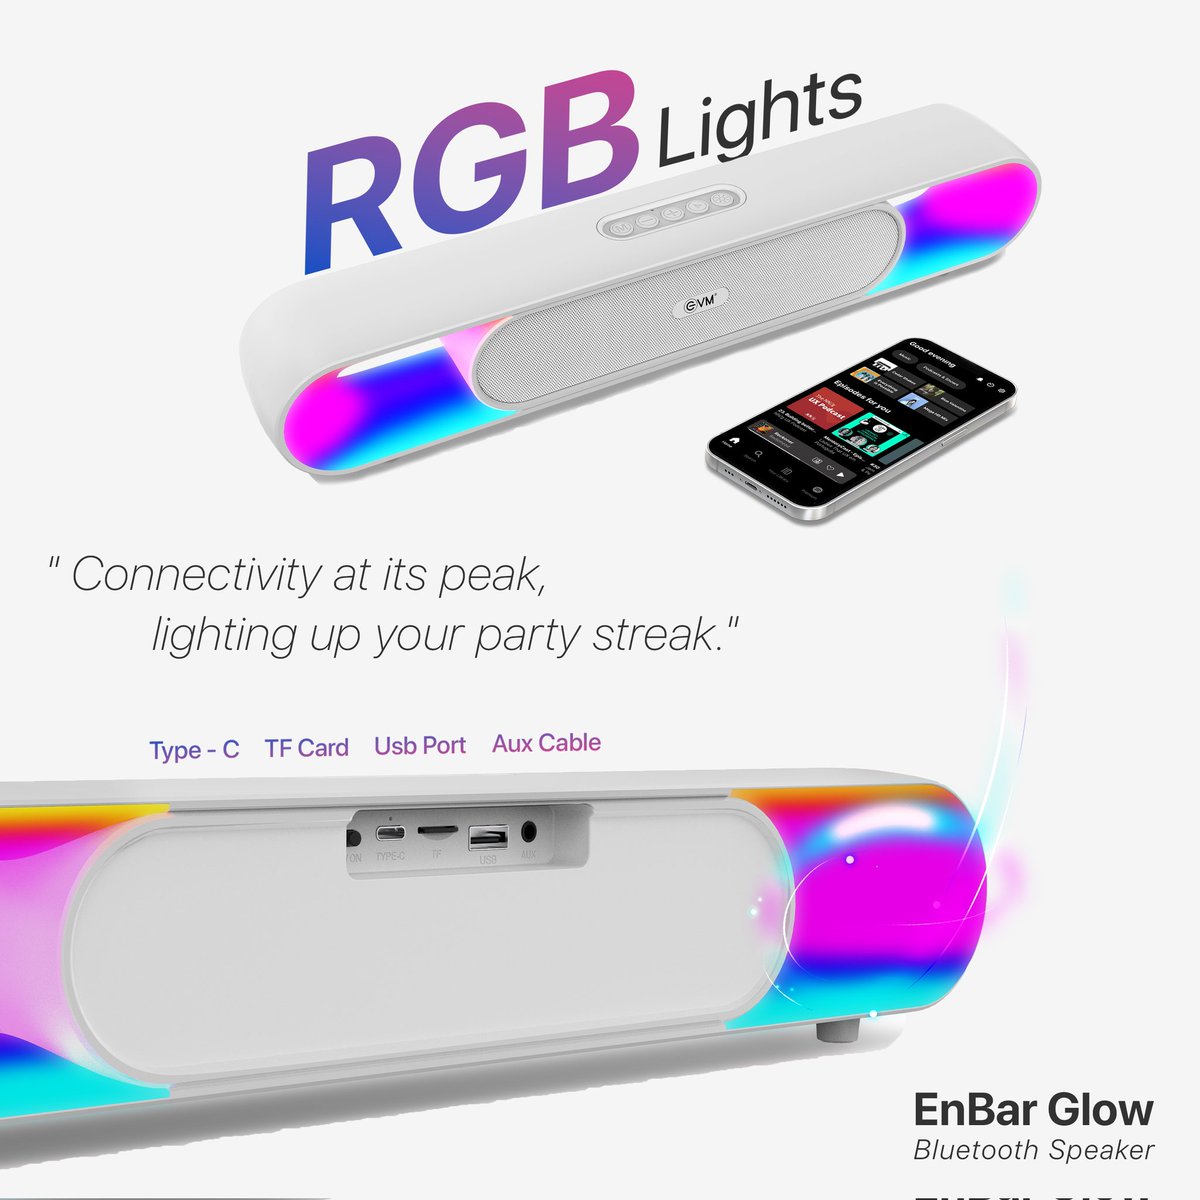 EVM EnBar Glow Bluetooth Speaker! With its multiple connectivity options and captivating RGB lights. 
. 
Visit Evmzone.com
#EvmIndia
.
 #bluetoothspeaker #glow #glowinglights #15hours #beats #music #technnology #mobileaccessories #electronics #gadgets #tech #evmforall